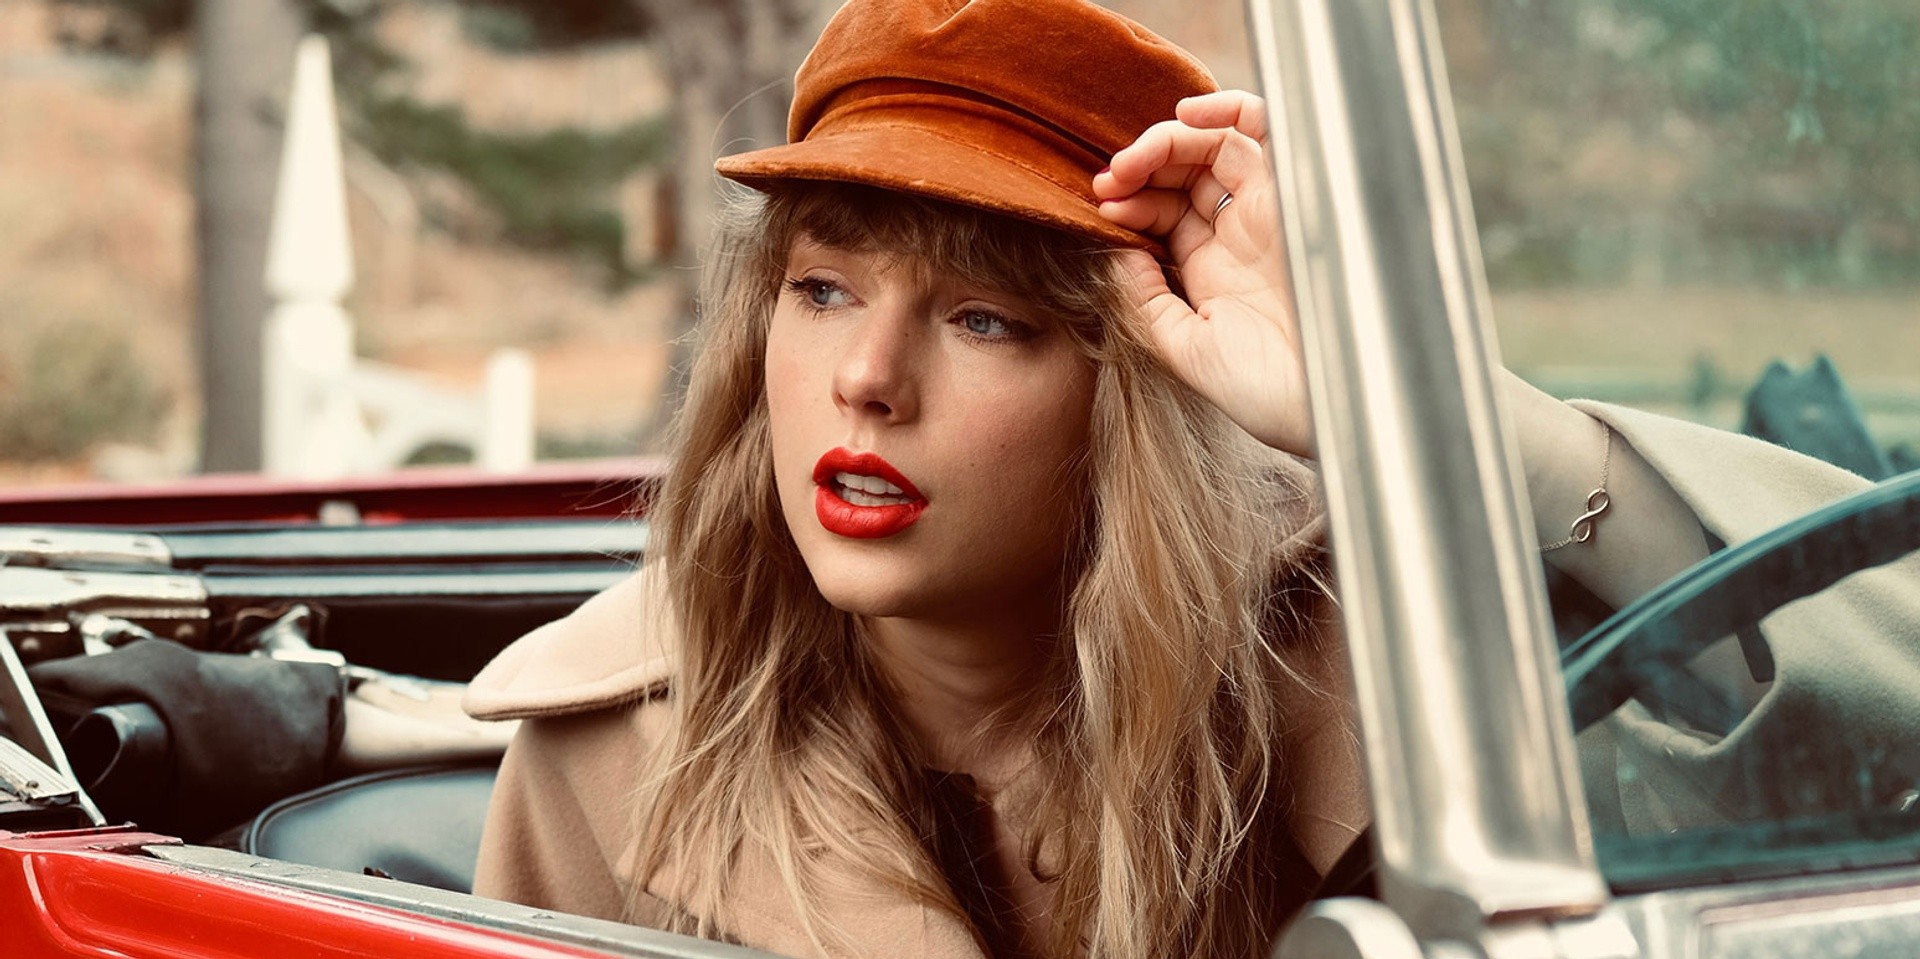 NYU's Clive Davis Institute launches Taylor Swift course